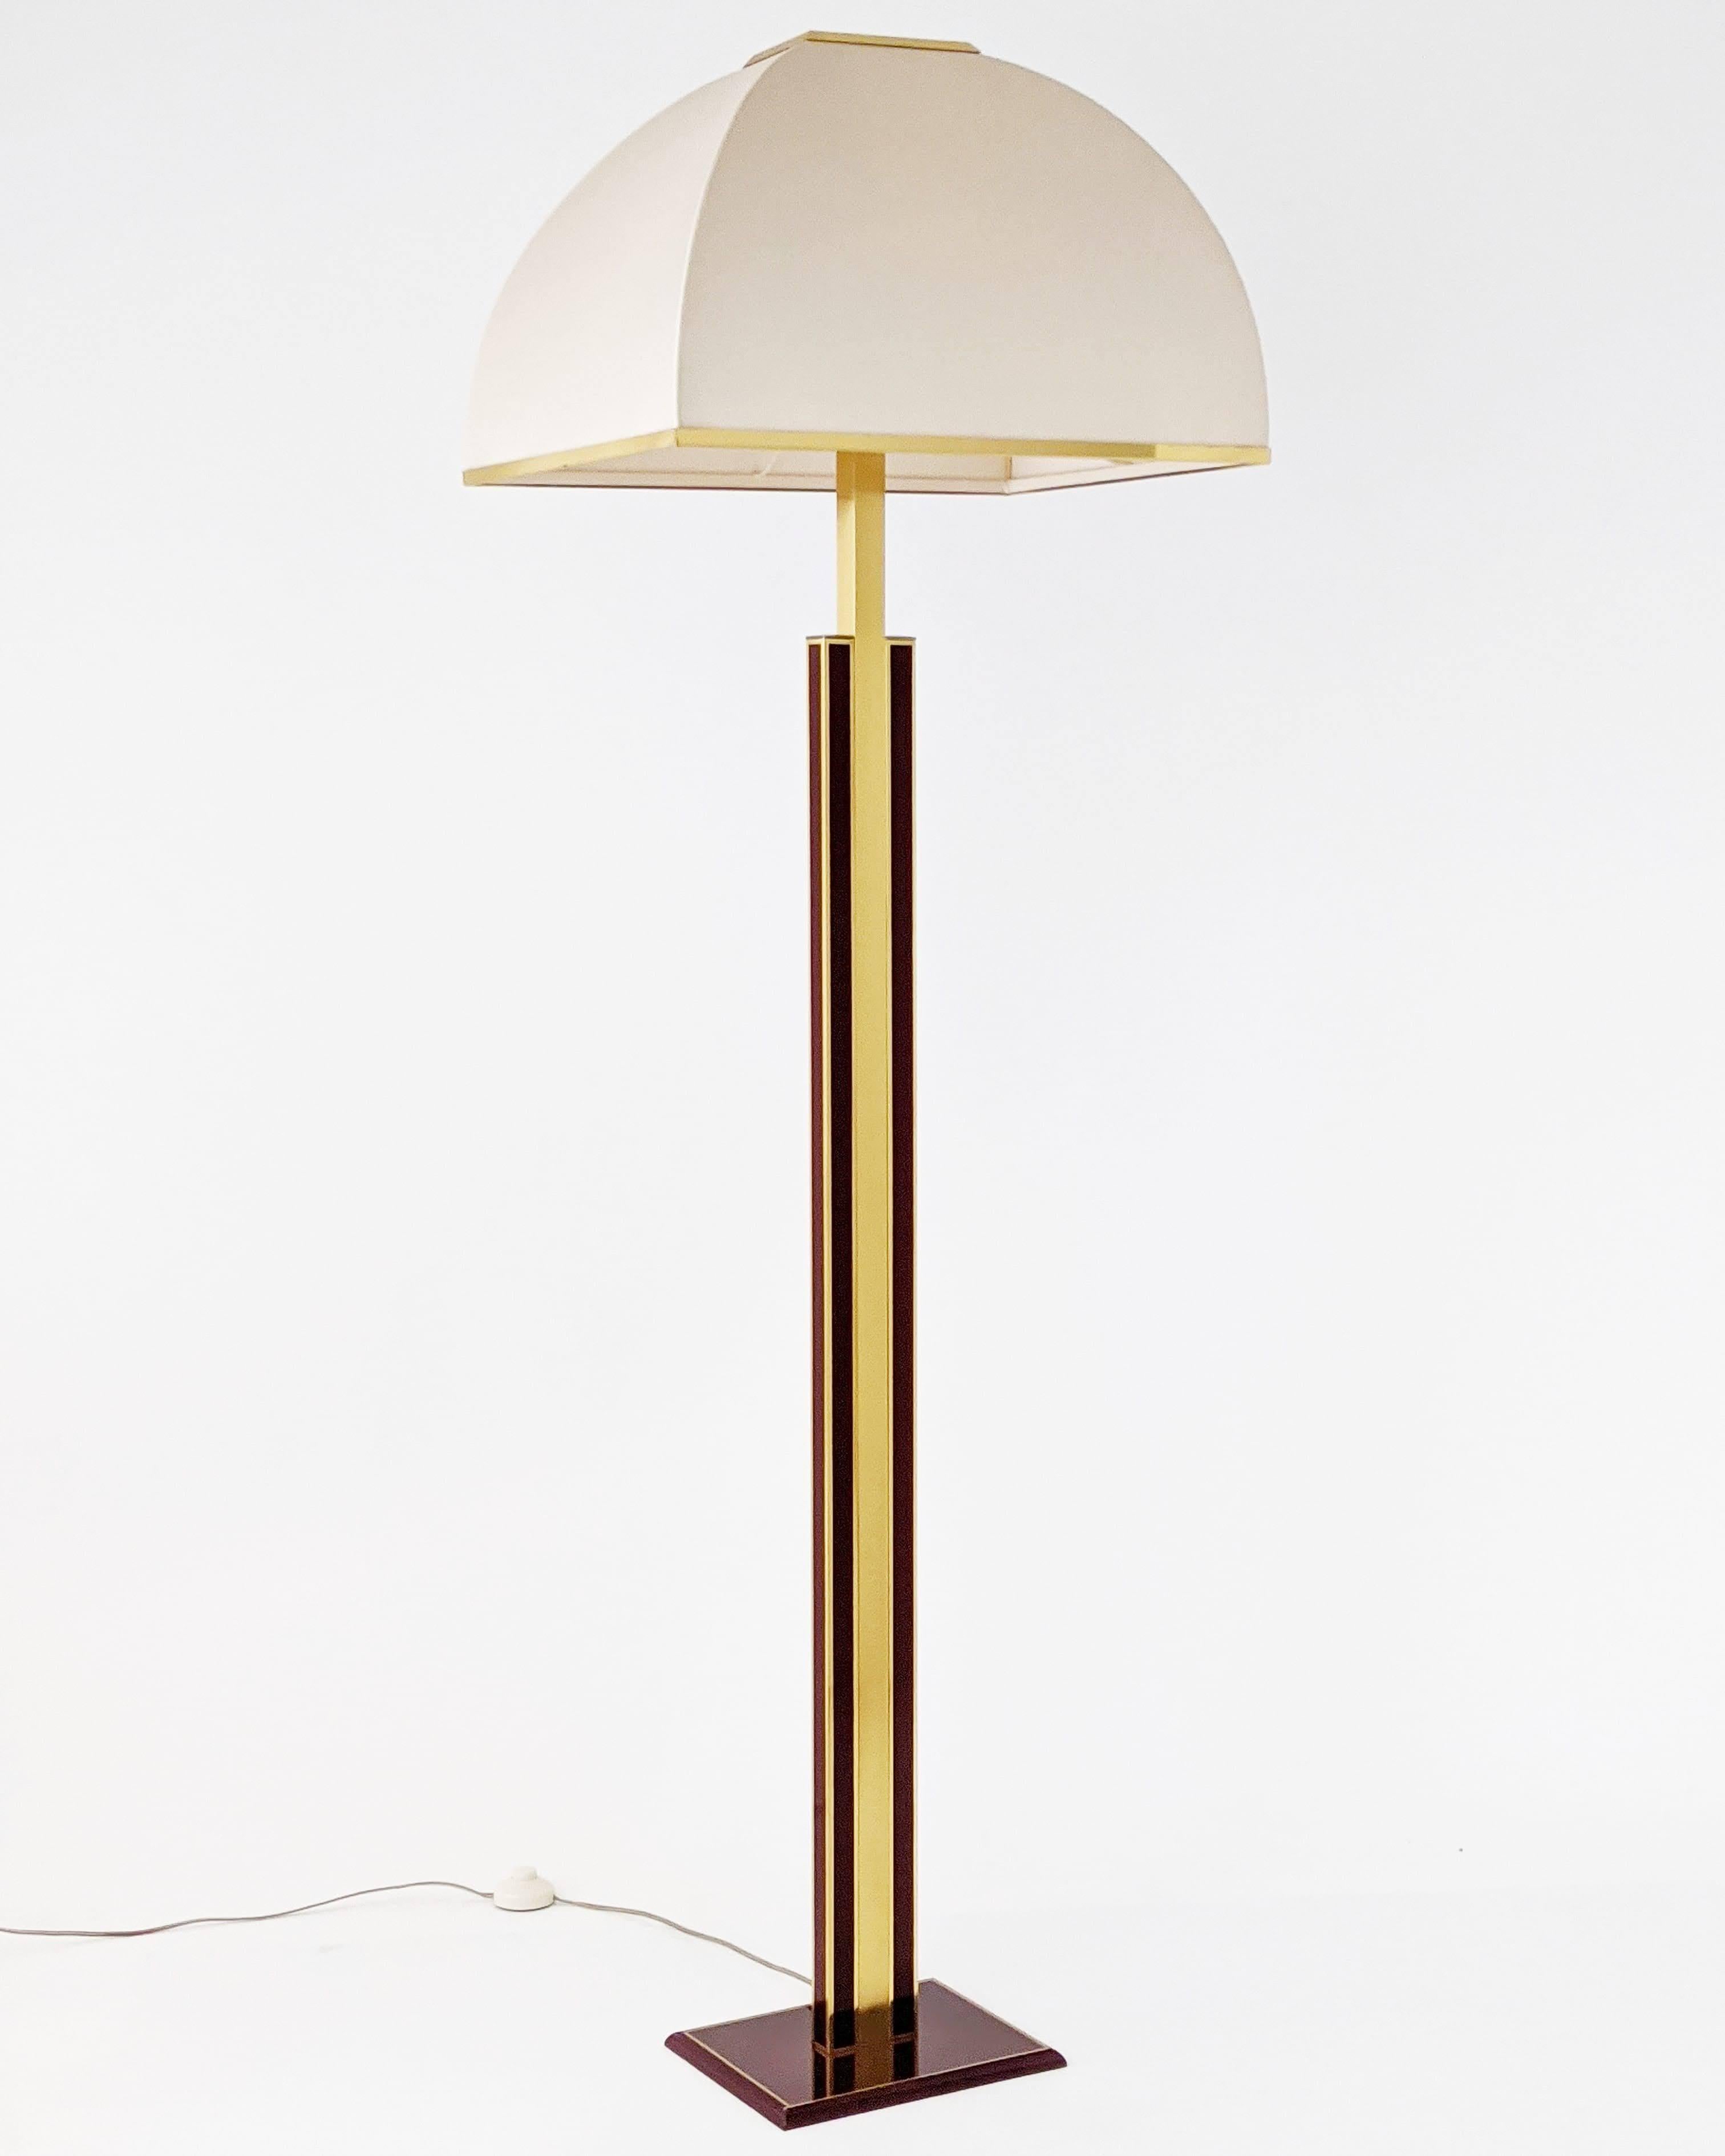 Rare, elegant Romeo Rega floor lamp made of thick brass with original beige fabric washable shade.

Prime quality material, well made with superb attention to detail.

Enameled in a dark red tone with a high gloss lacquered finish.

Shade